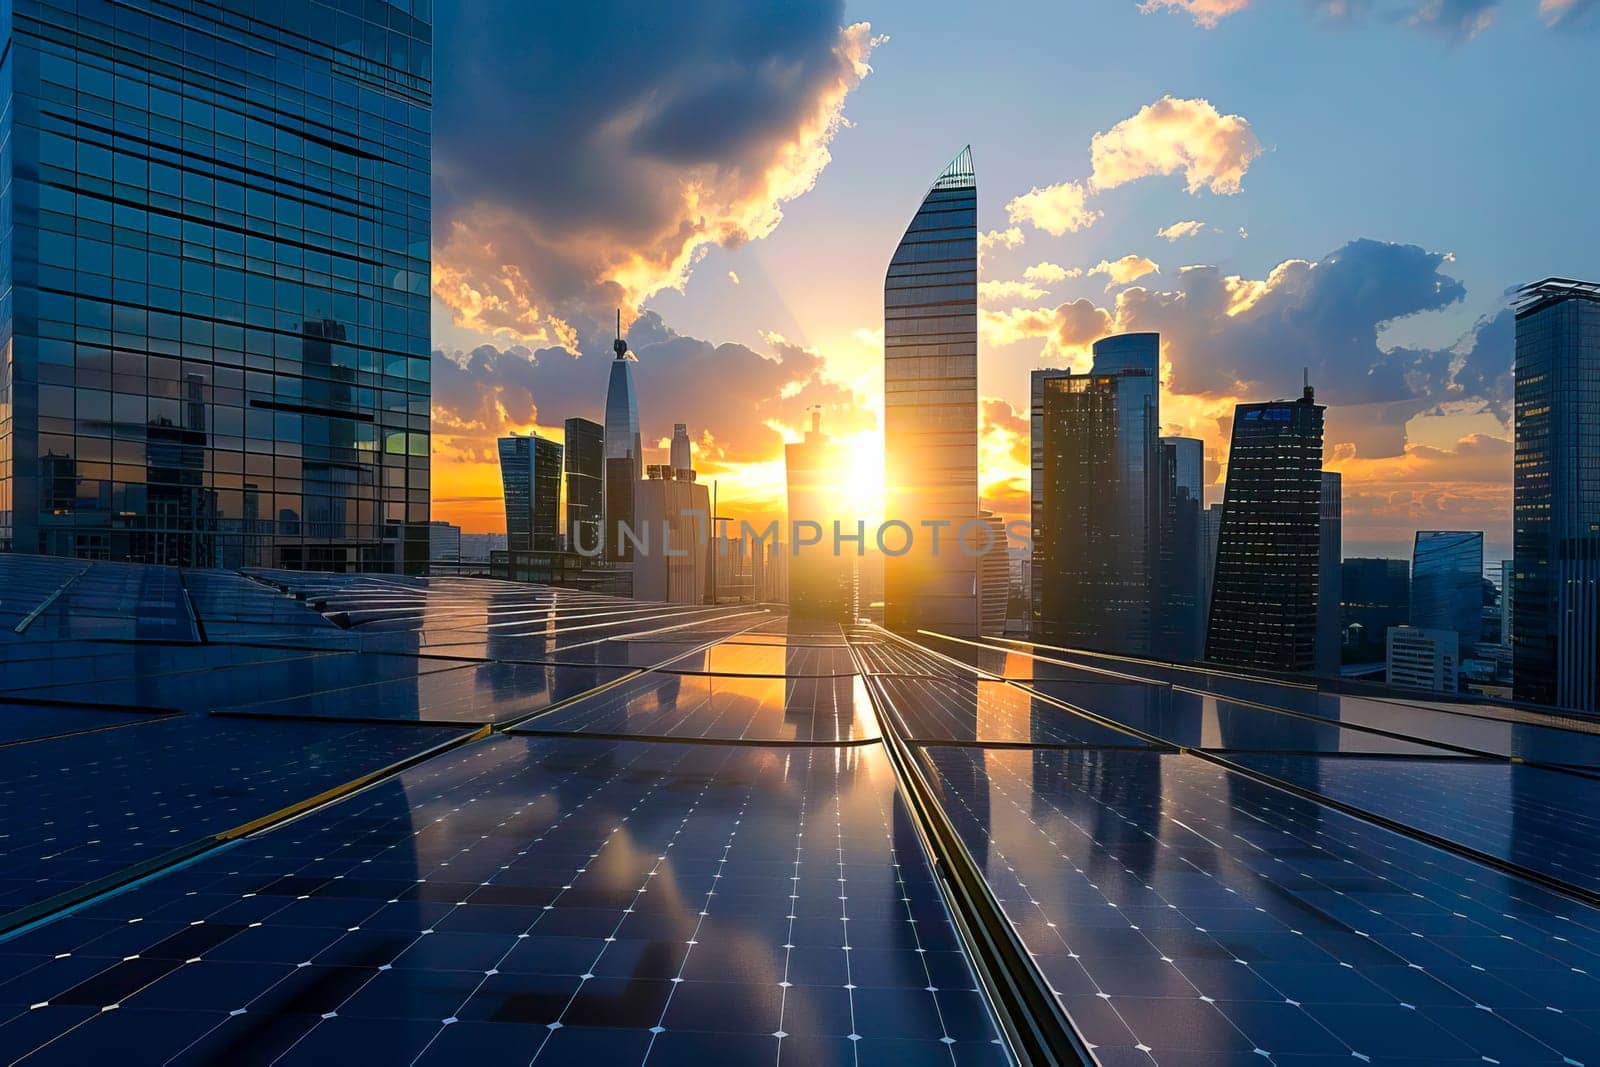 The sun sets over a modern city skyline filled with skyscrapers and solar panels. by vladimka